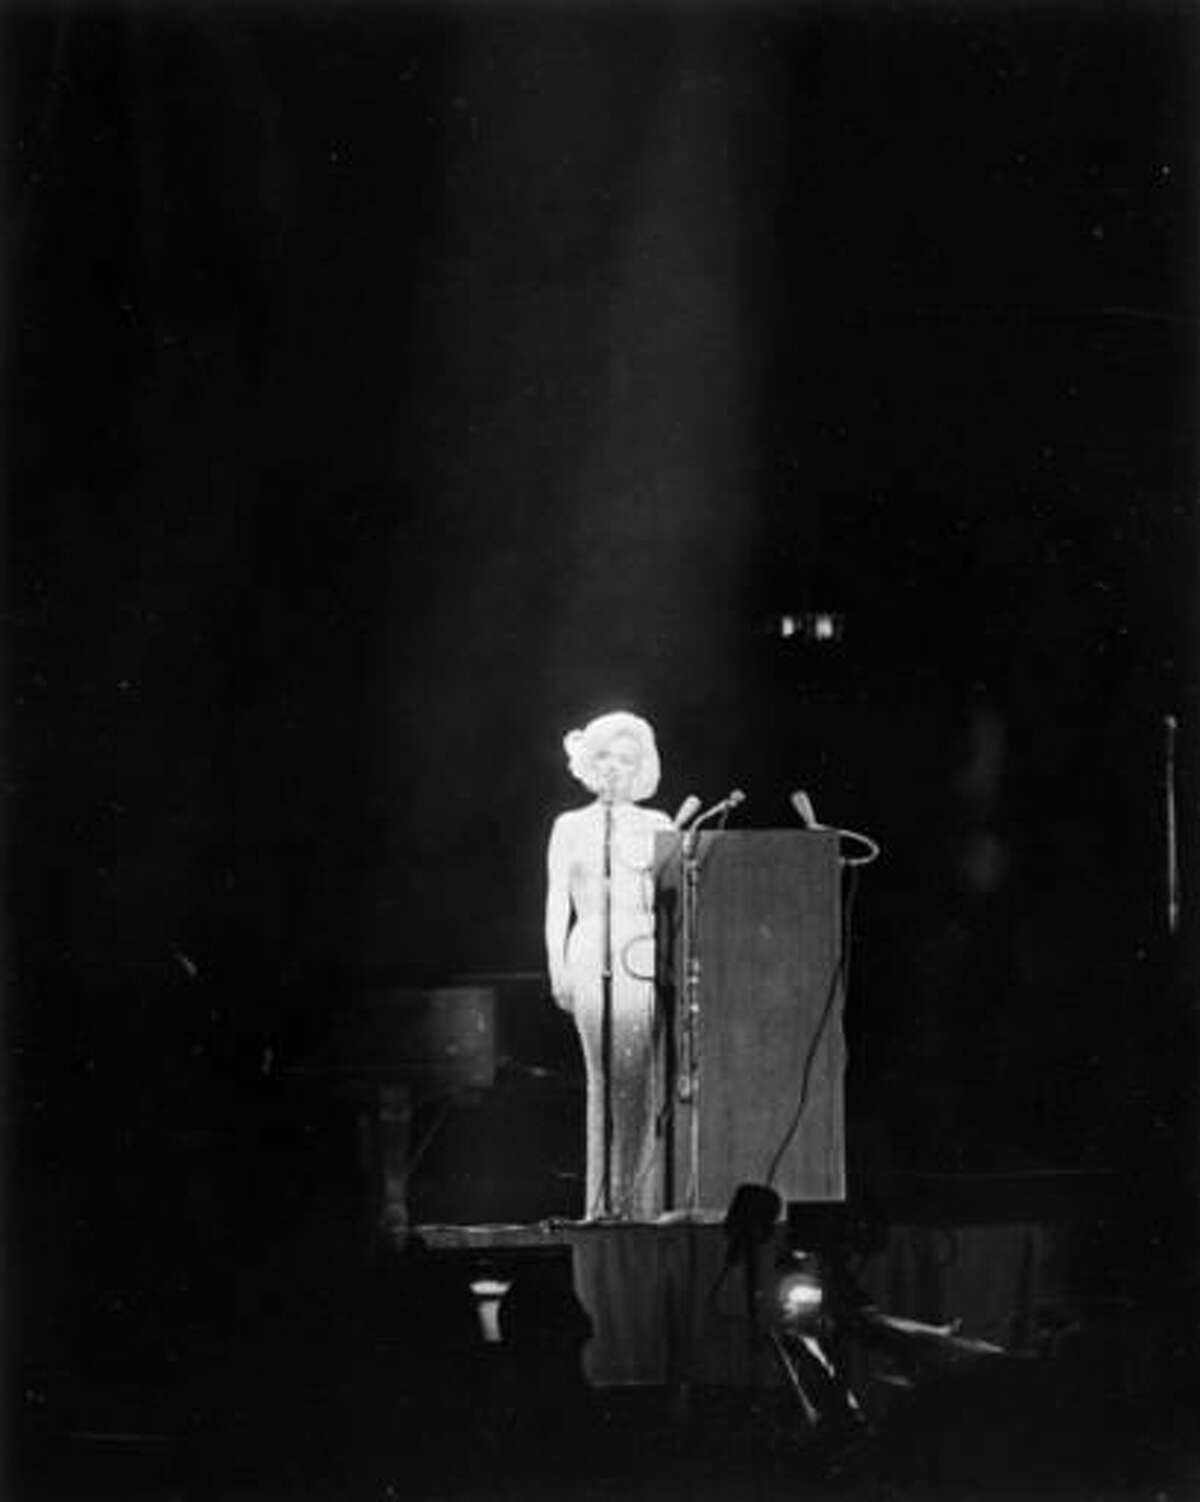 In this May 19, 1962 photo provided by the John F. Kennedy Presidential Library and Museum, actress Marilyn Monroe sings "Happy Birthday" to President Kennedy at his 45th birthday celebration at New York's Madison Square Garden. Julien's Auctions will offer the barely-there dress Monroe wore at the performance at an auction in Los Angeles on Nov. 17, 2016. (Cecil Stoughton/White House Photographs, John F. Kennedy Presidential Library and Museum via AP)